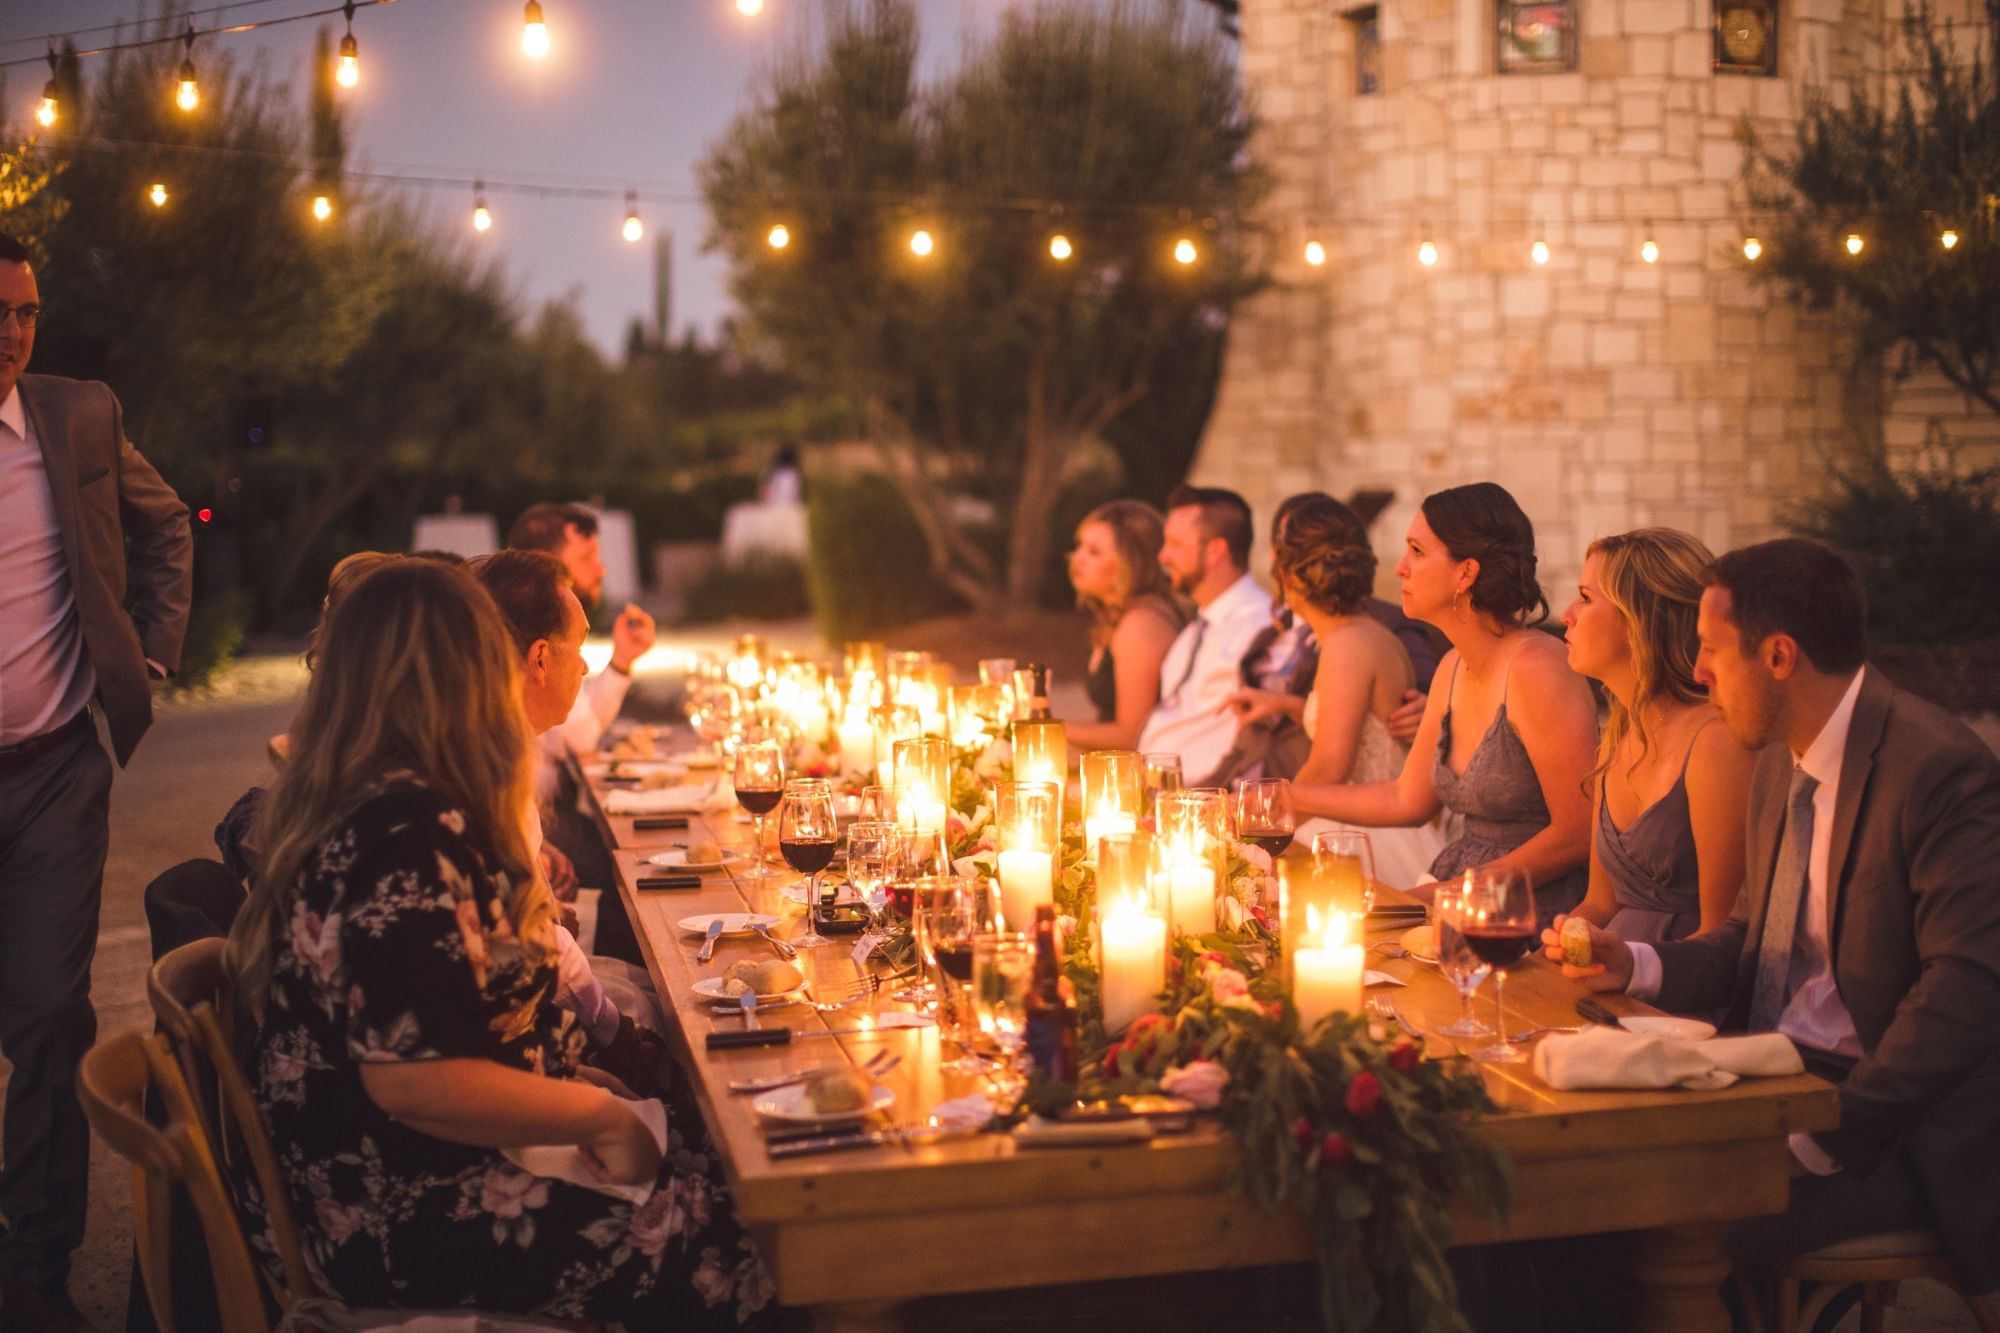 Group of people enjoying a private candlelit dinner in the gardens at dusk